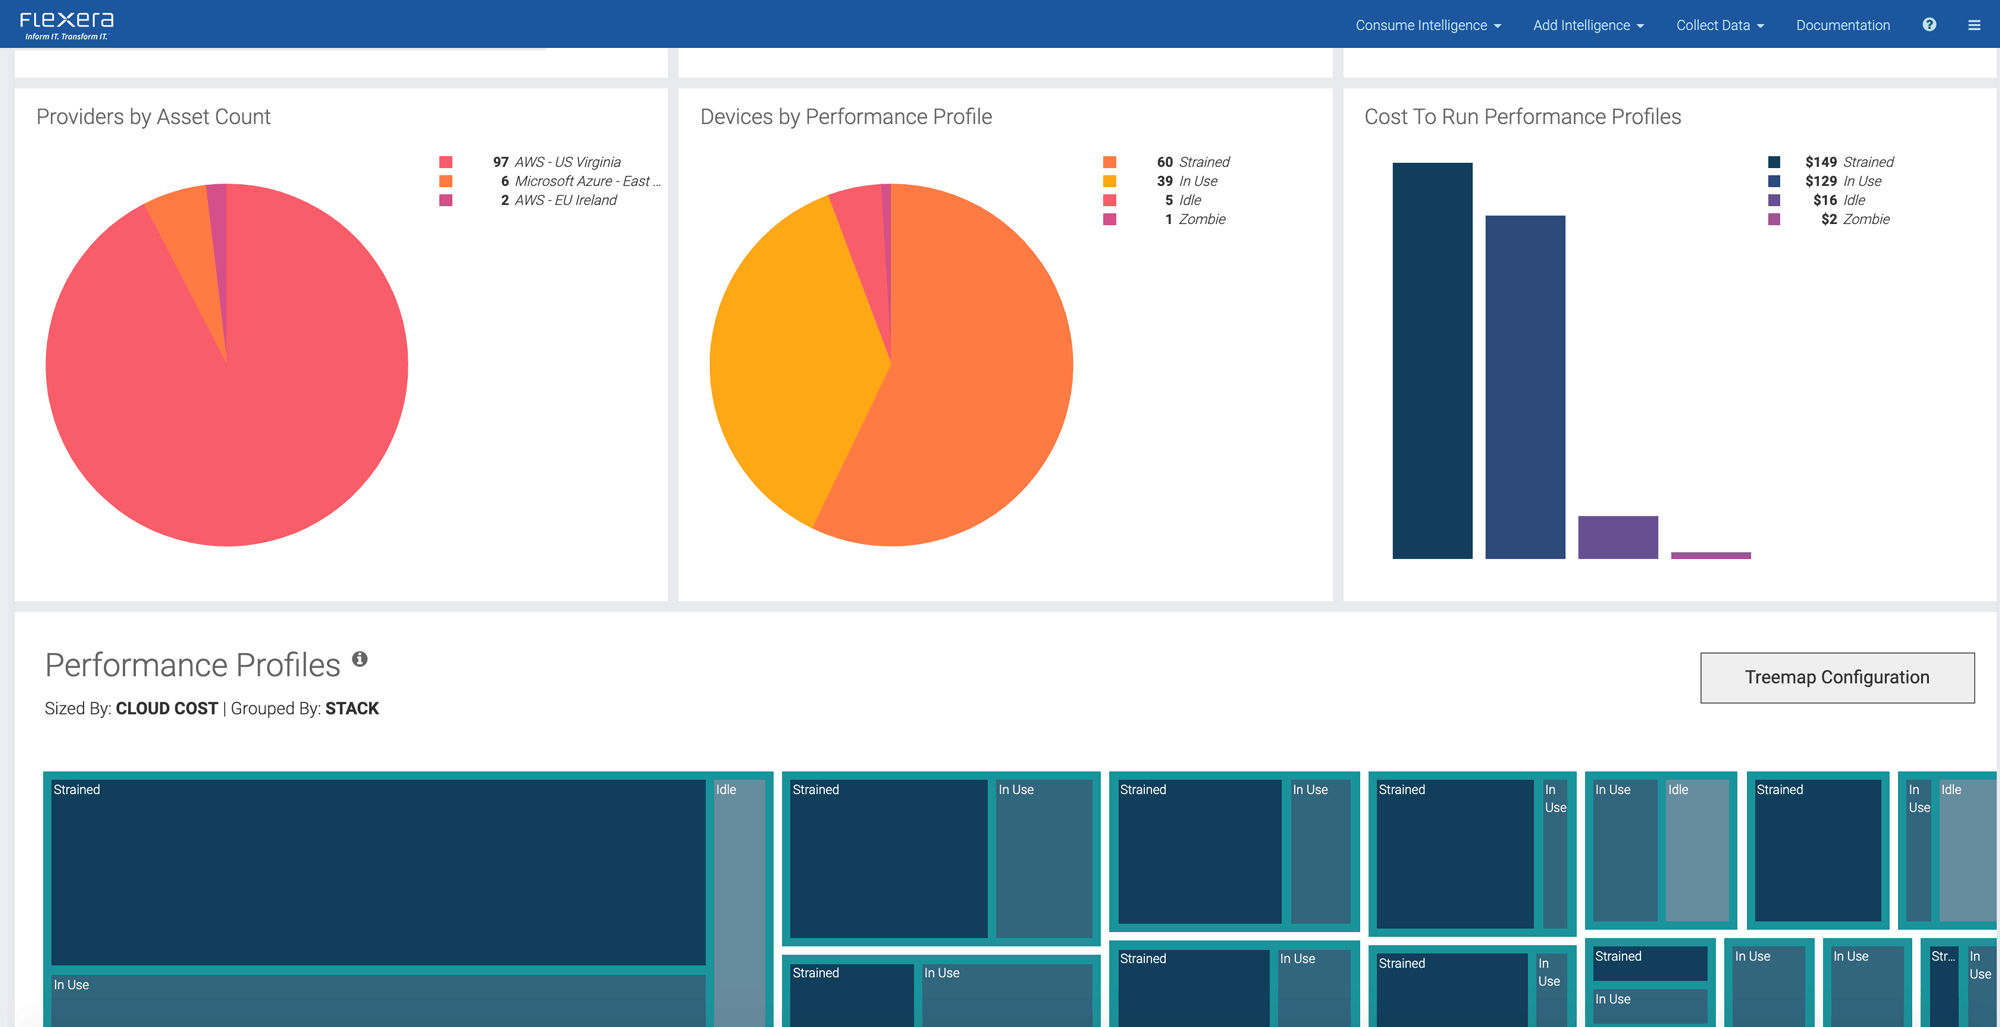 Colored bar and pie graphs showcasing cloud performance based on asset count, devices, and cost to run